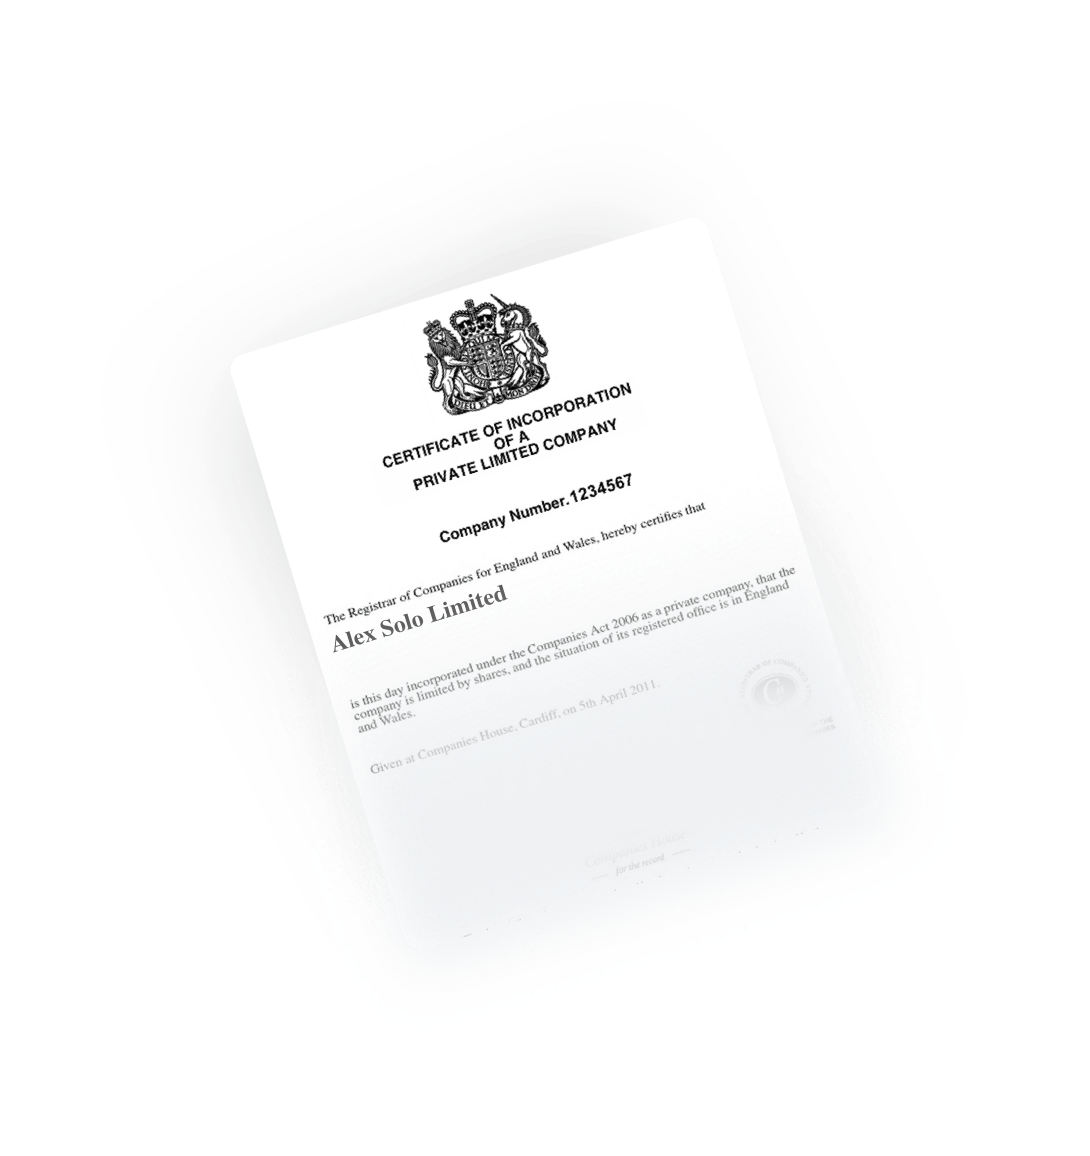 certificate of incorporation of private limited company uk